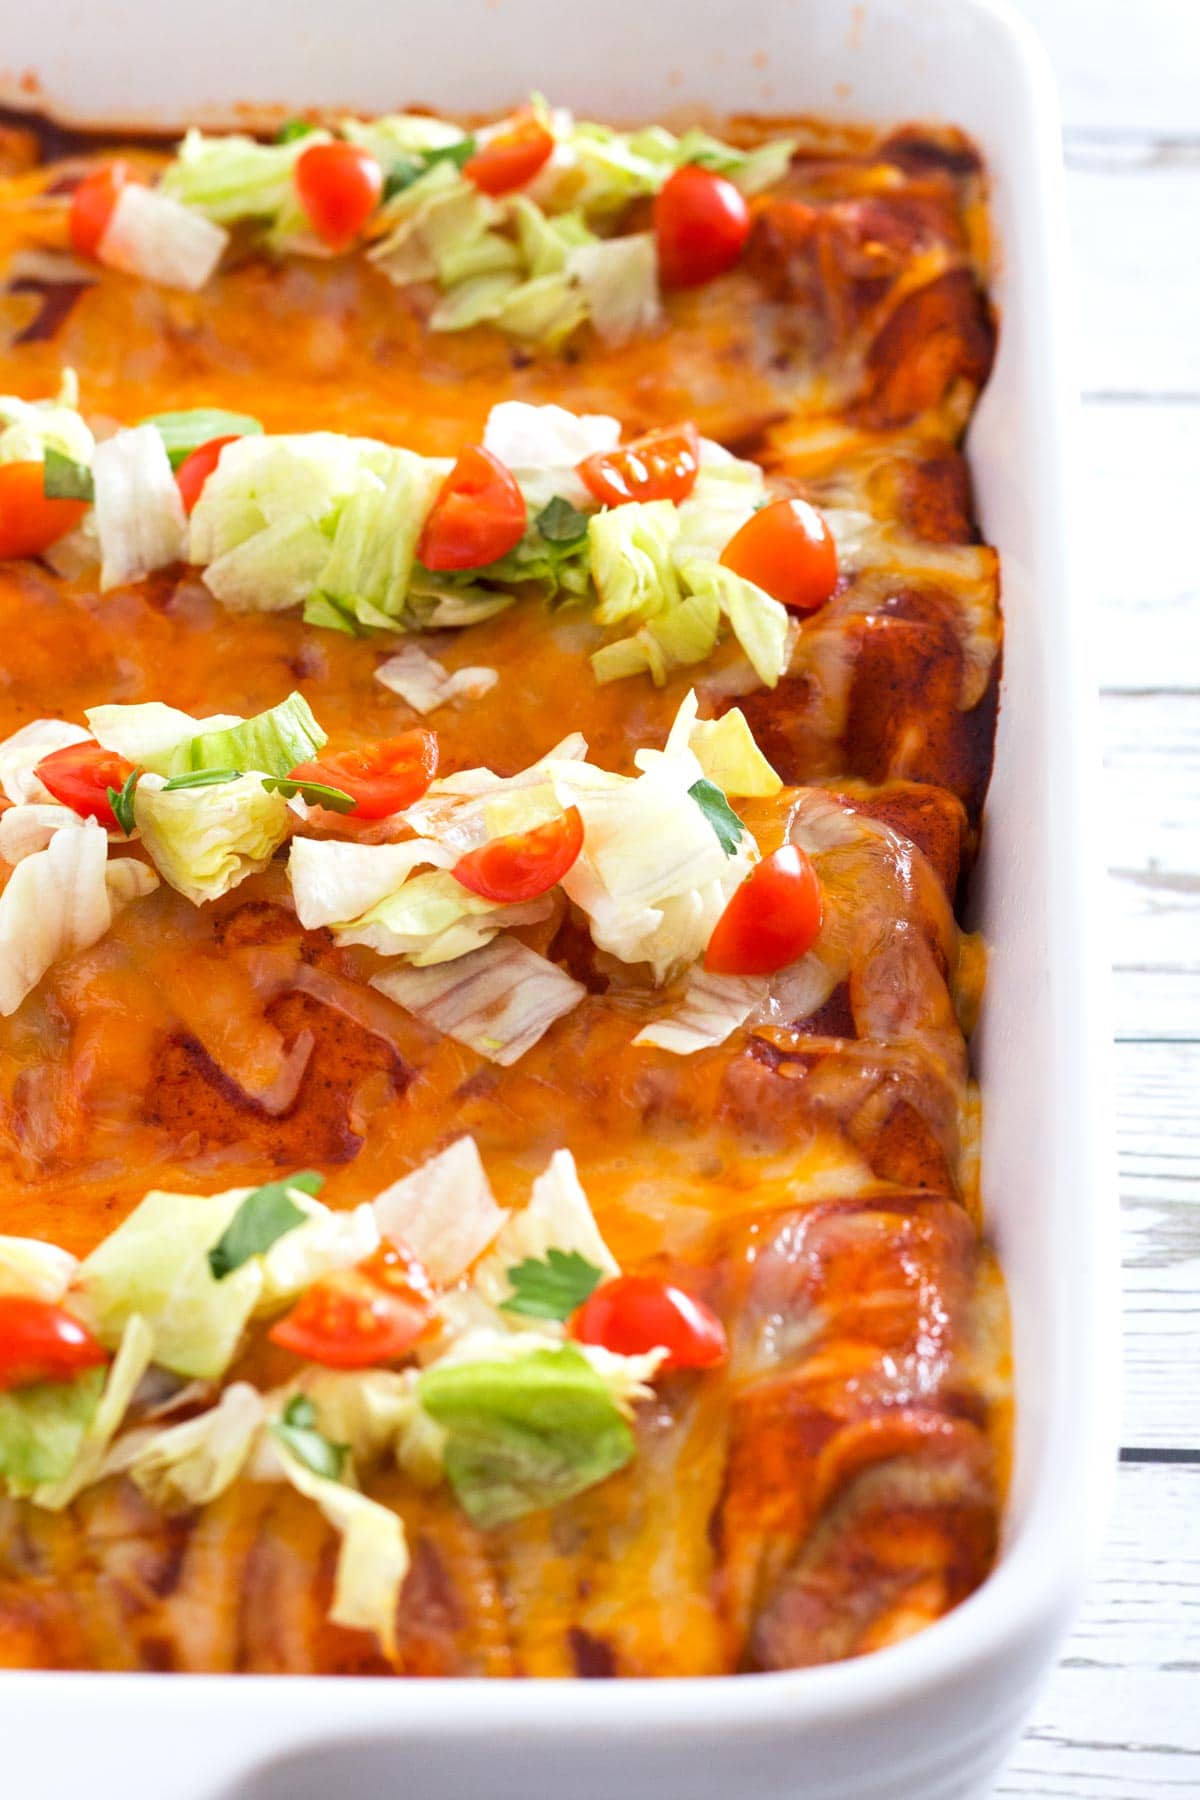 Burritos covered in enchilada sauce, cheese, and topped with lettuce and tomato.